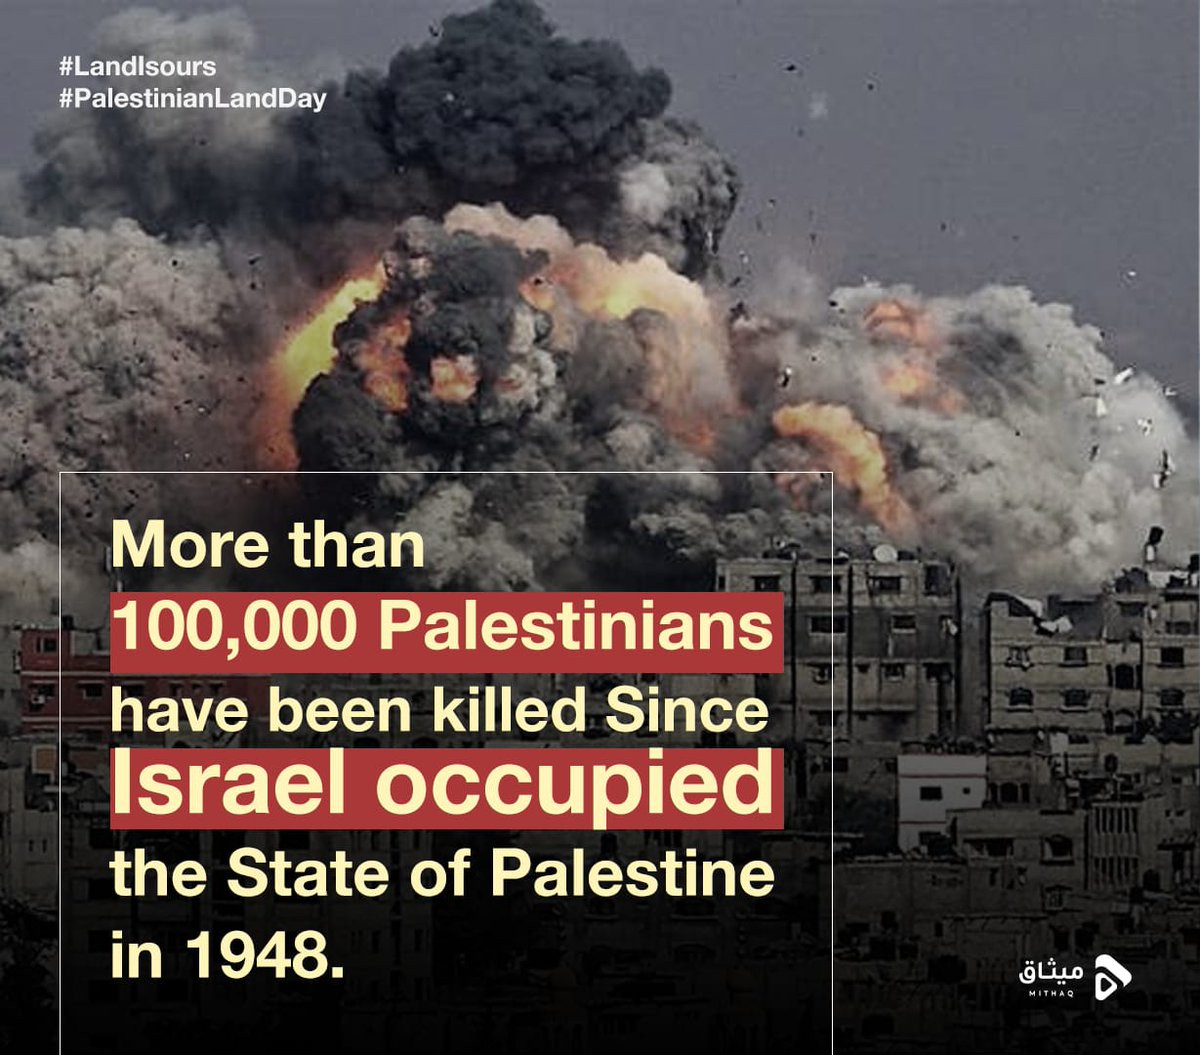 More than 100,000 Palestinians have been killed Since Israel occupied the State of Palestine in 1948